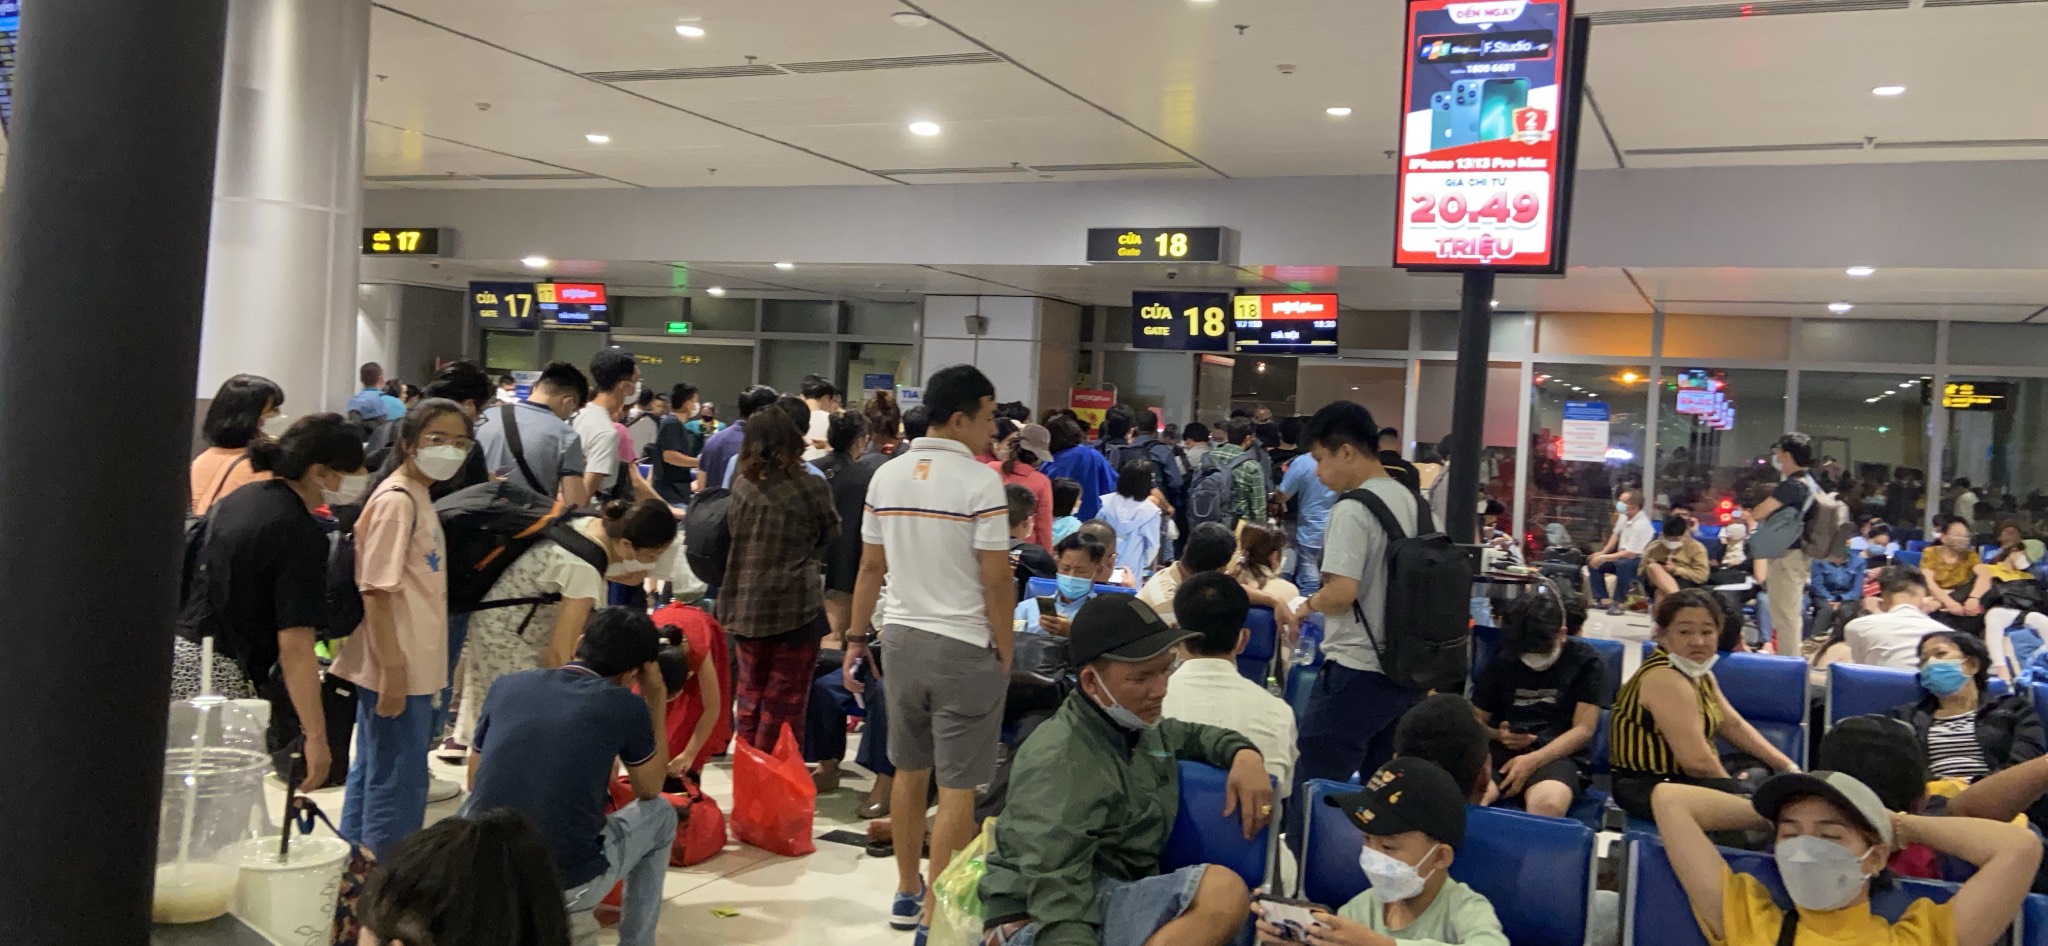 Bad weather, system outage cause mass delay at Ho Chi Minh City airport